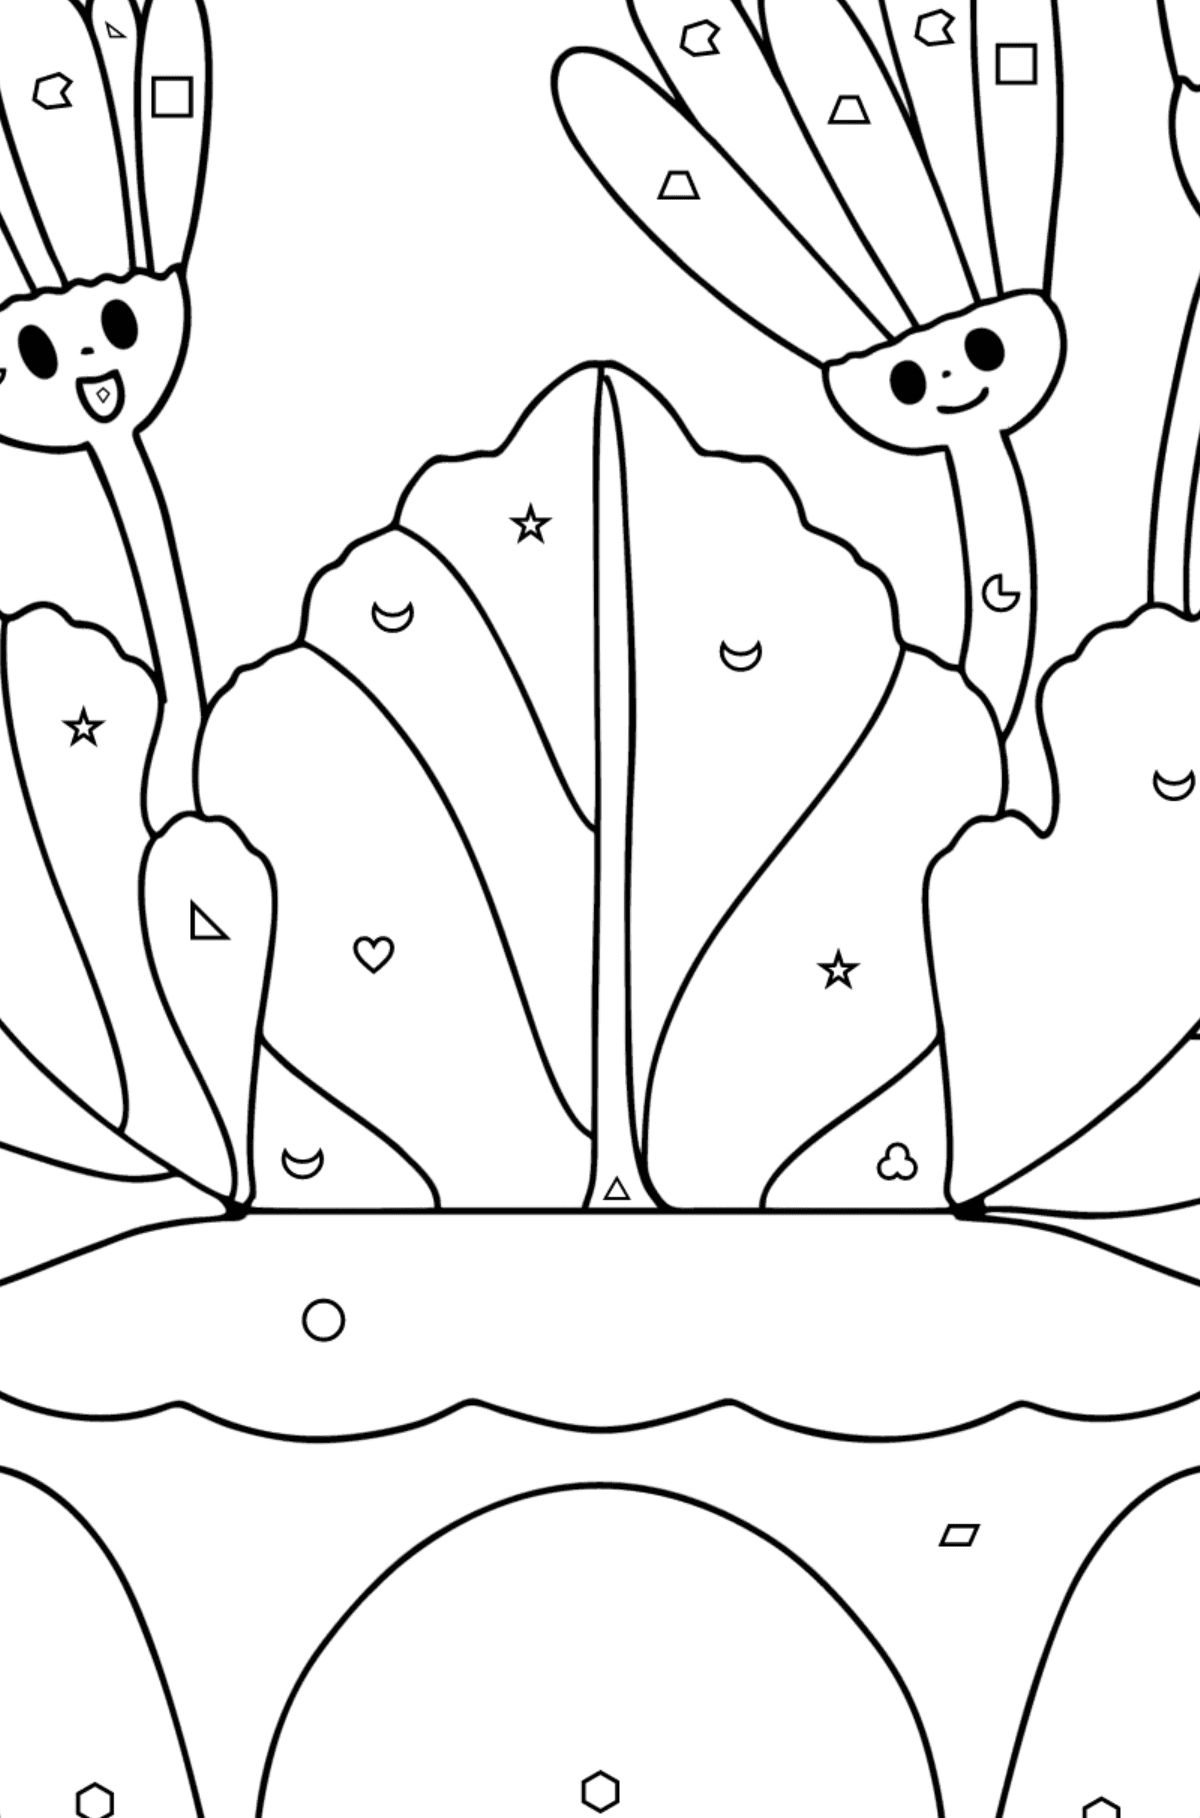 Primrose with eyes coloring page - Coloring by Geometric Shapes for Kids